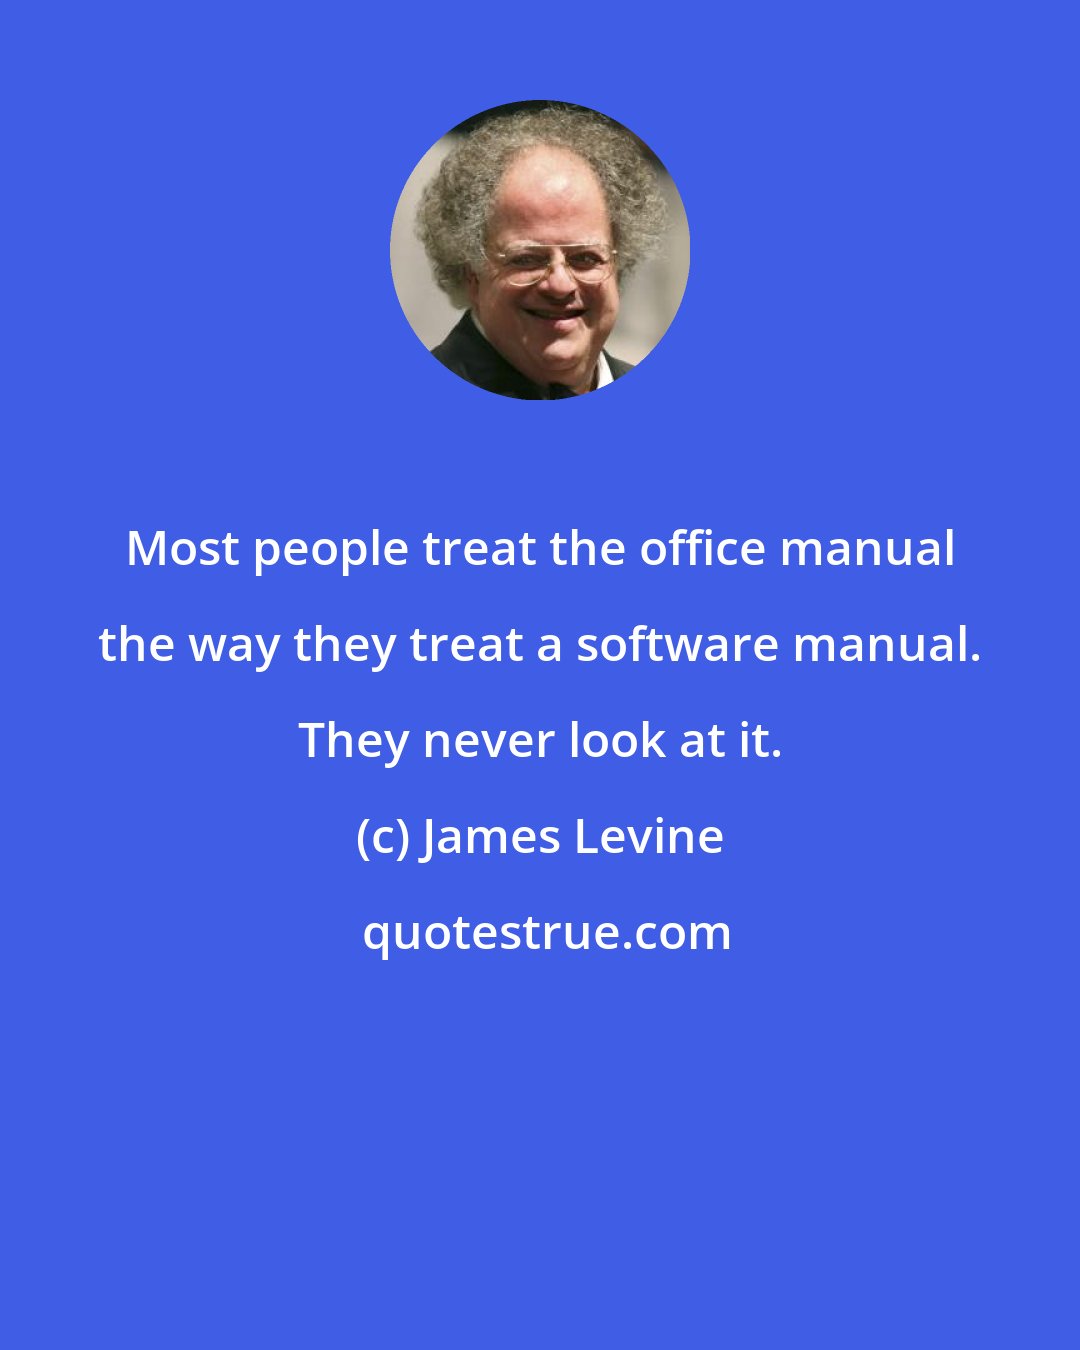 James Levine: Most people treat the office manual the way they treat a software manual. They never look at it.